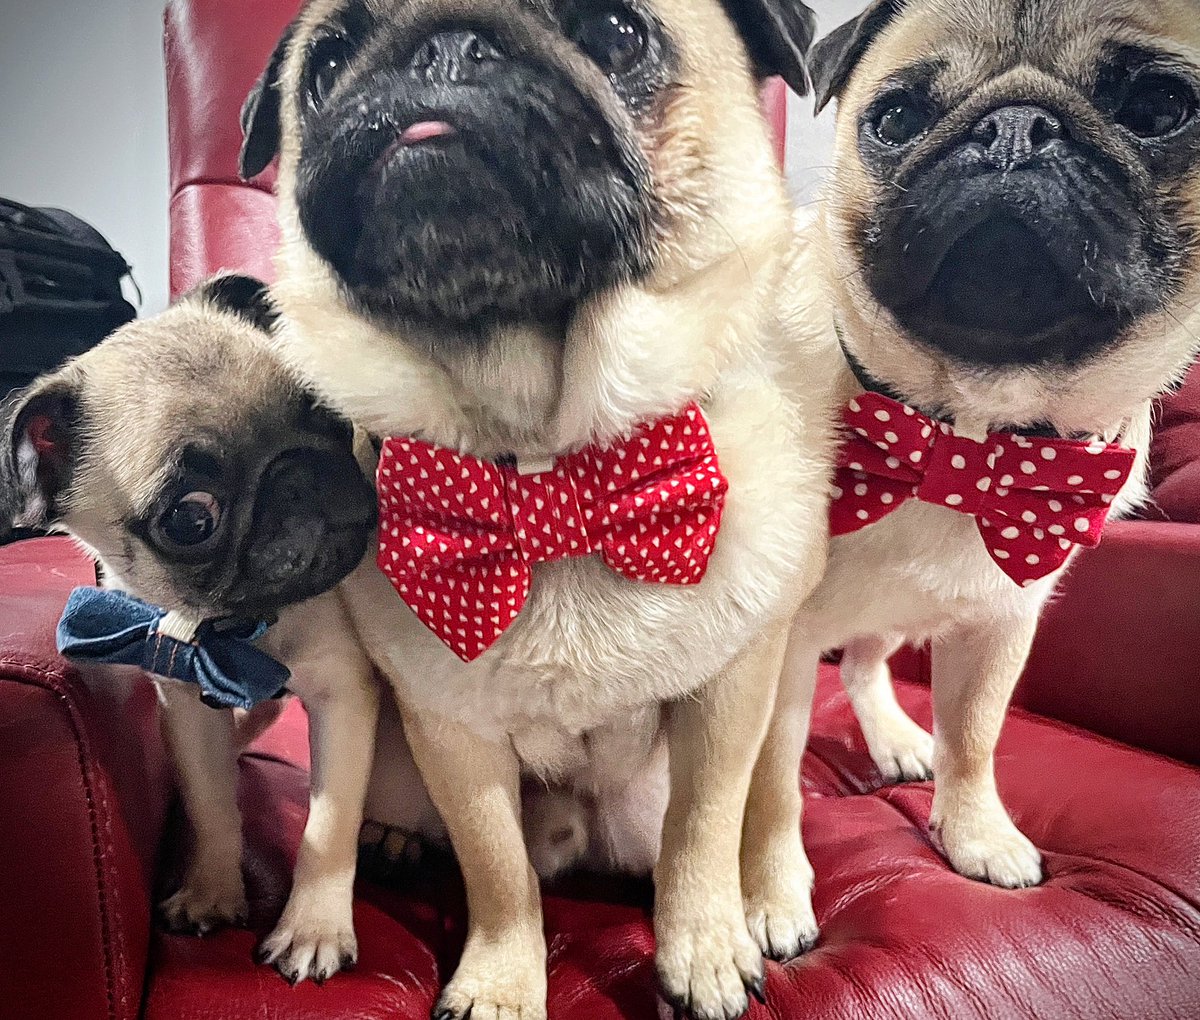 Todays combo … teeny tiny #tongueouttuesday blended with #tietuesday ! Meet our new friend Ruben in his 1st #bow tie from #DoggieBowTie ❤️

#pug #puglovers #cutenessoverload